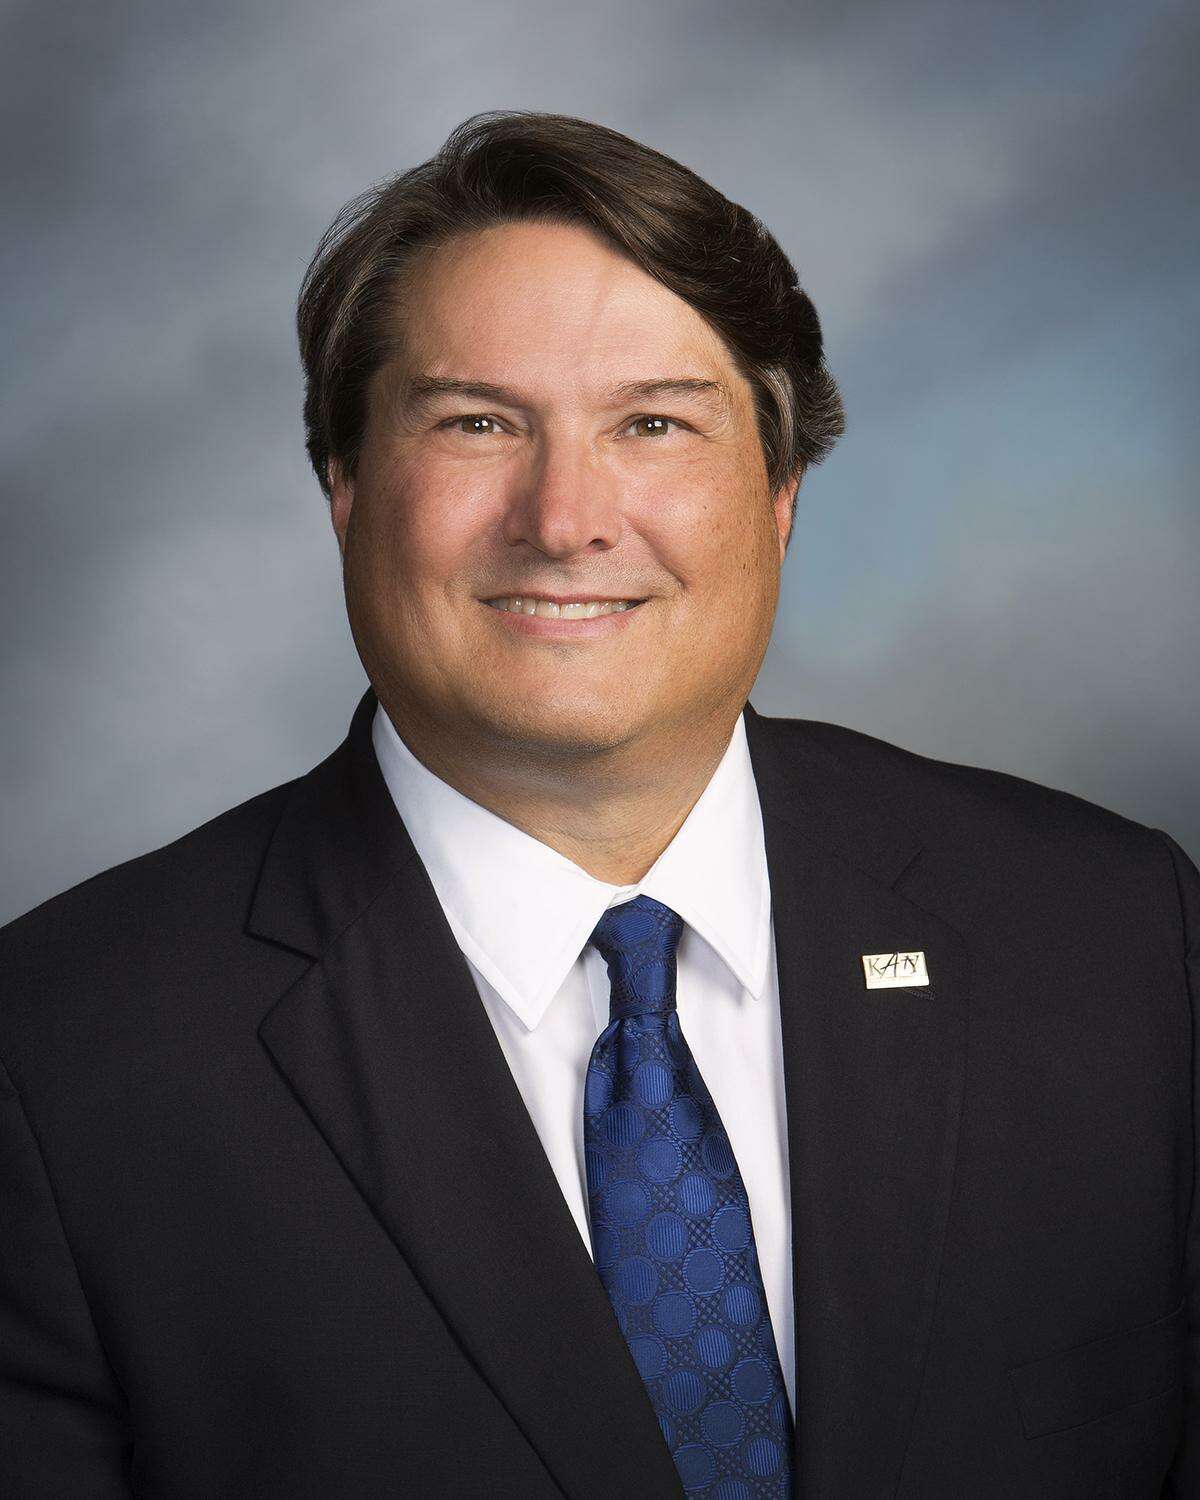 Position 5 Trustee Bill Lacy has drawn an opponent in the May 2 Katy Independent School District school board election.